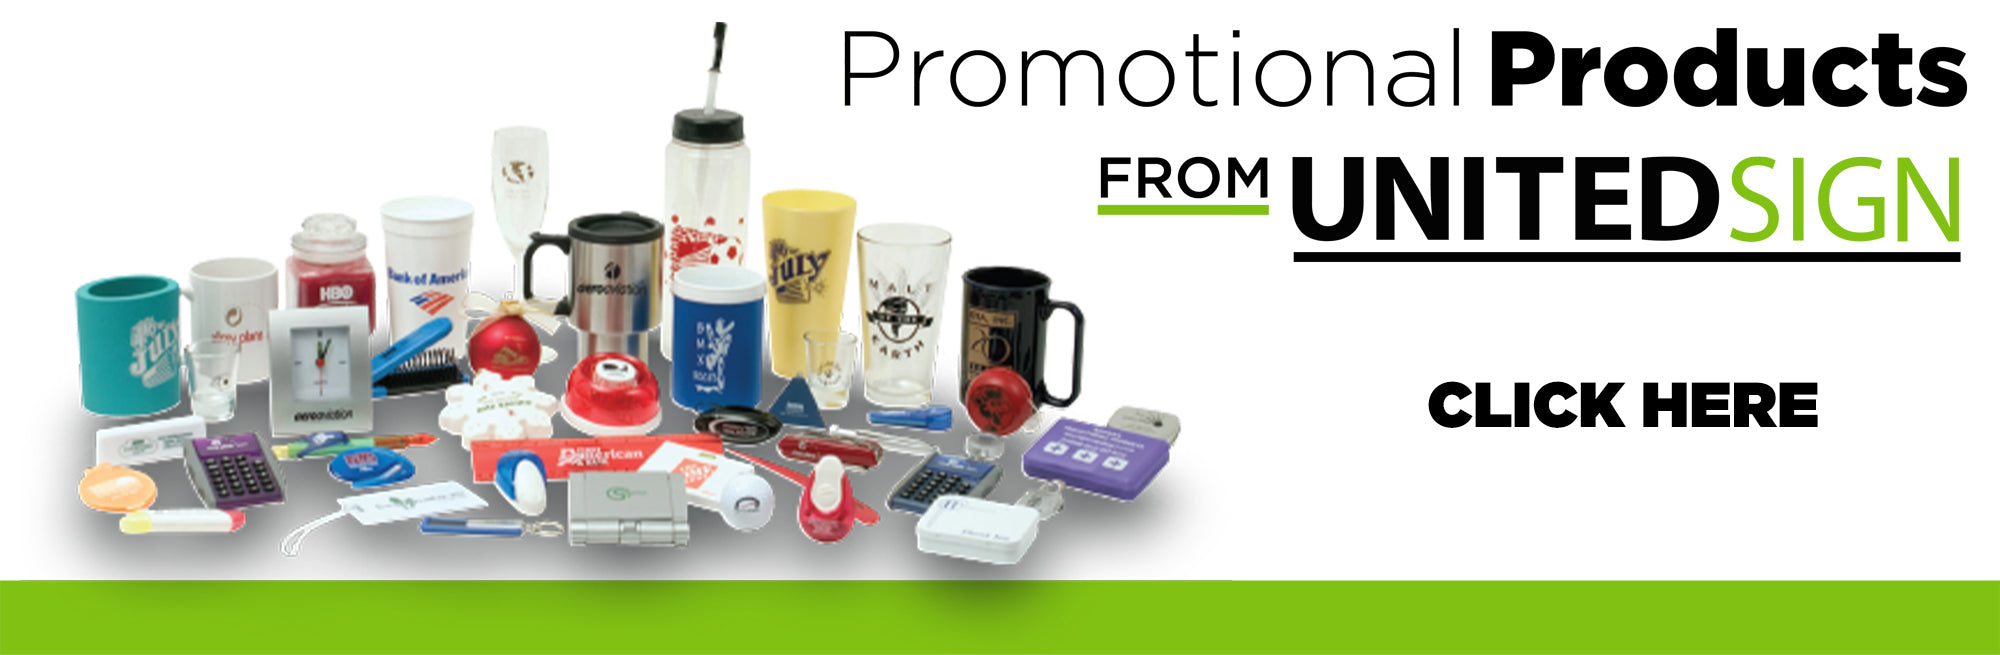 Promotional Products from UnitedSign